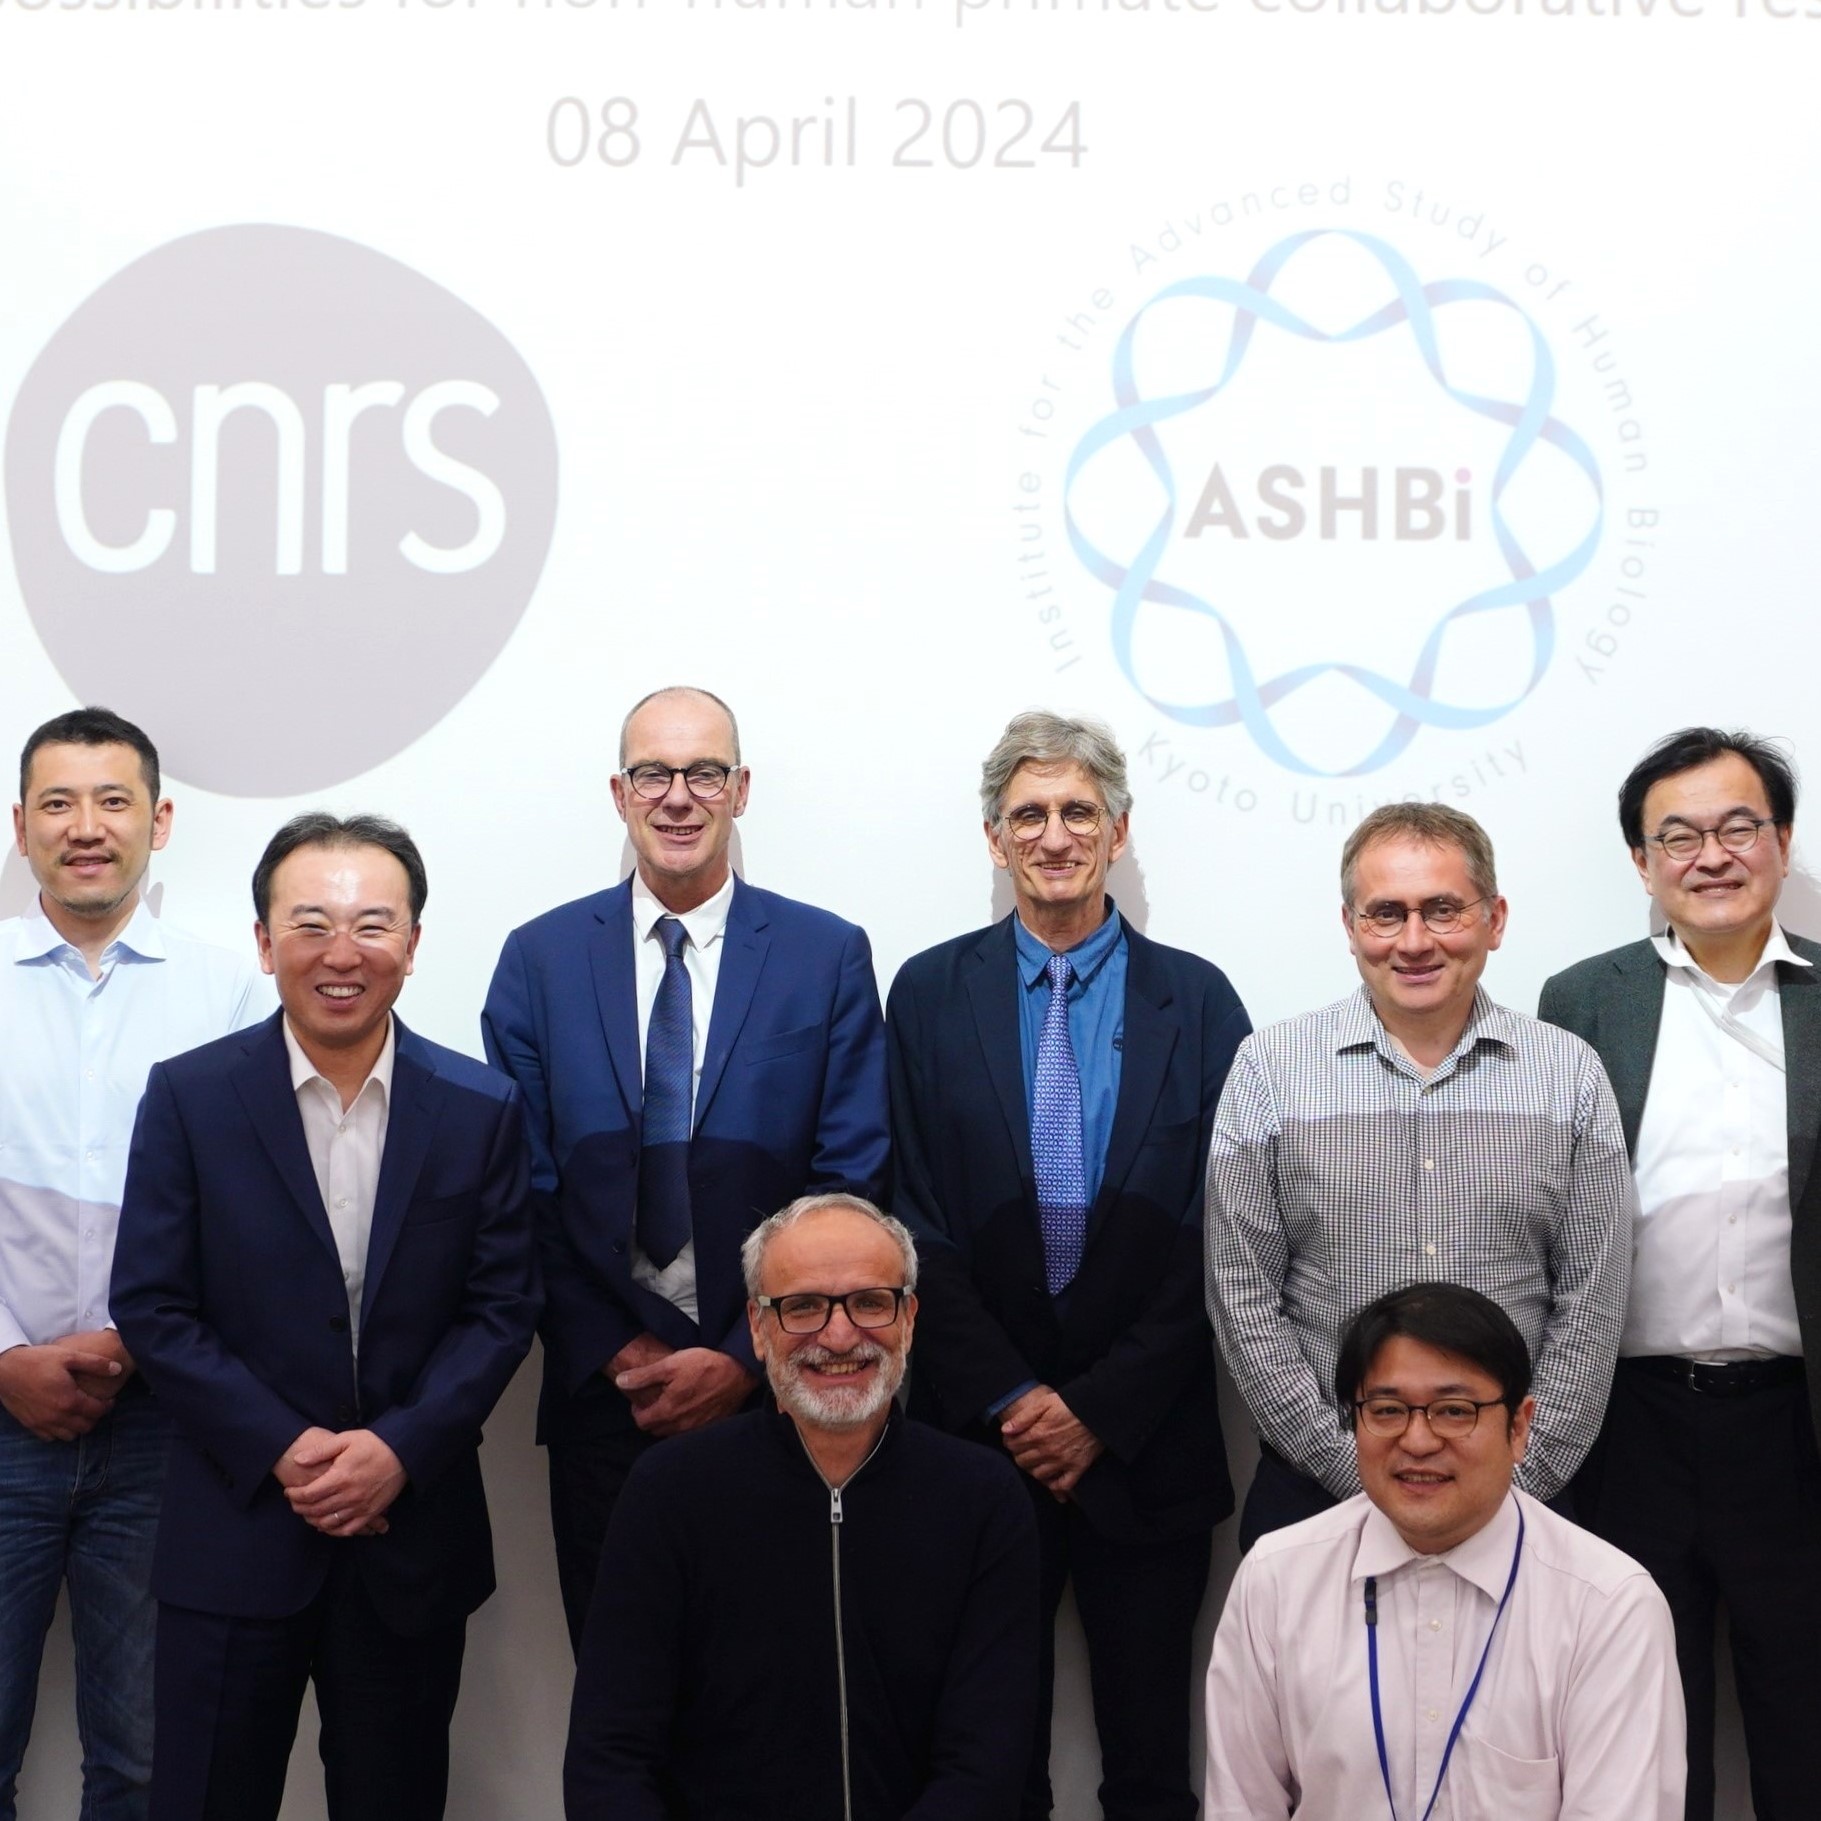 The French National Centre for Scientific Research (CNRS) delegation visits ASHBi